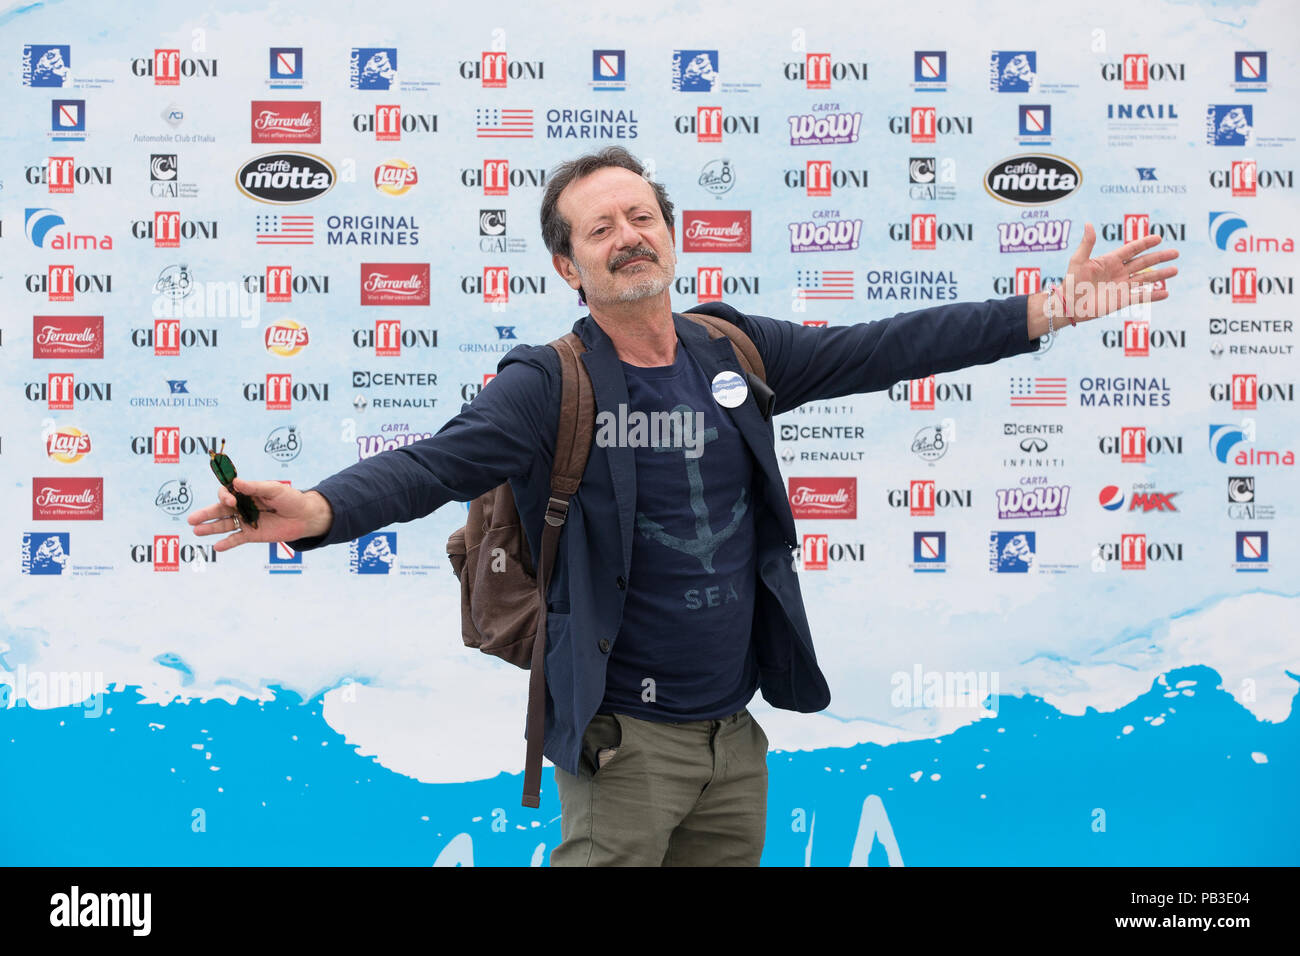 Salerno, Campania, Italy. 26th July, 2018. Rocco Papaleo, Italian actor seen posing for the camera at the festival.The 48th edition of the Giffoni Film Festival, a cinema for children. Credit: Ernesto Vicinanza/SOPA Images/ZUMA Wire/Alamy Live News Stock Photo